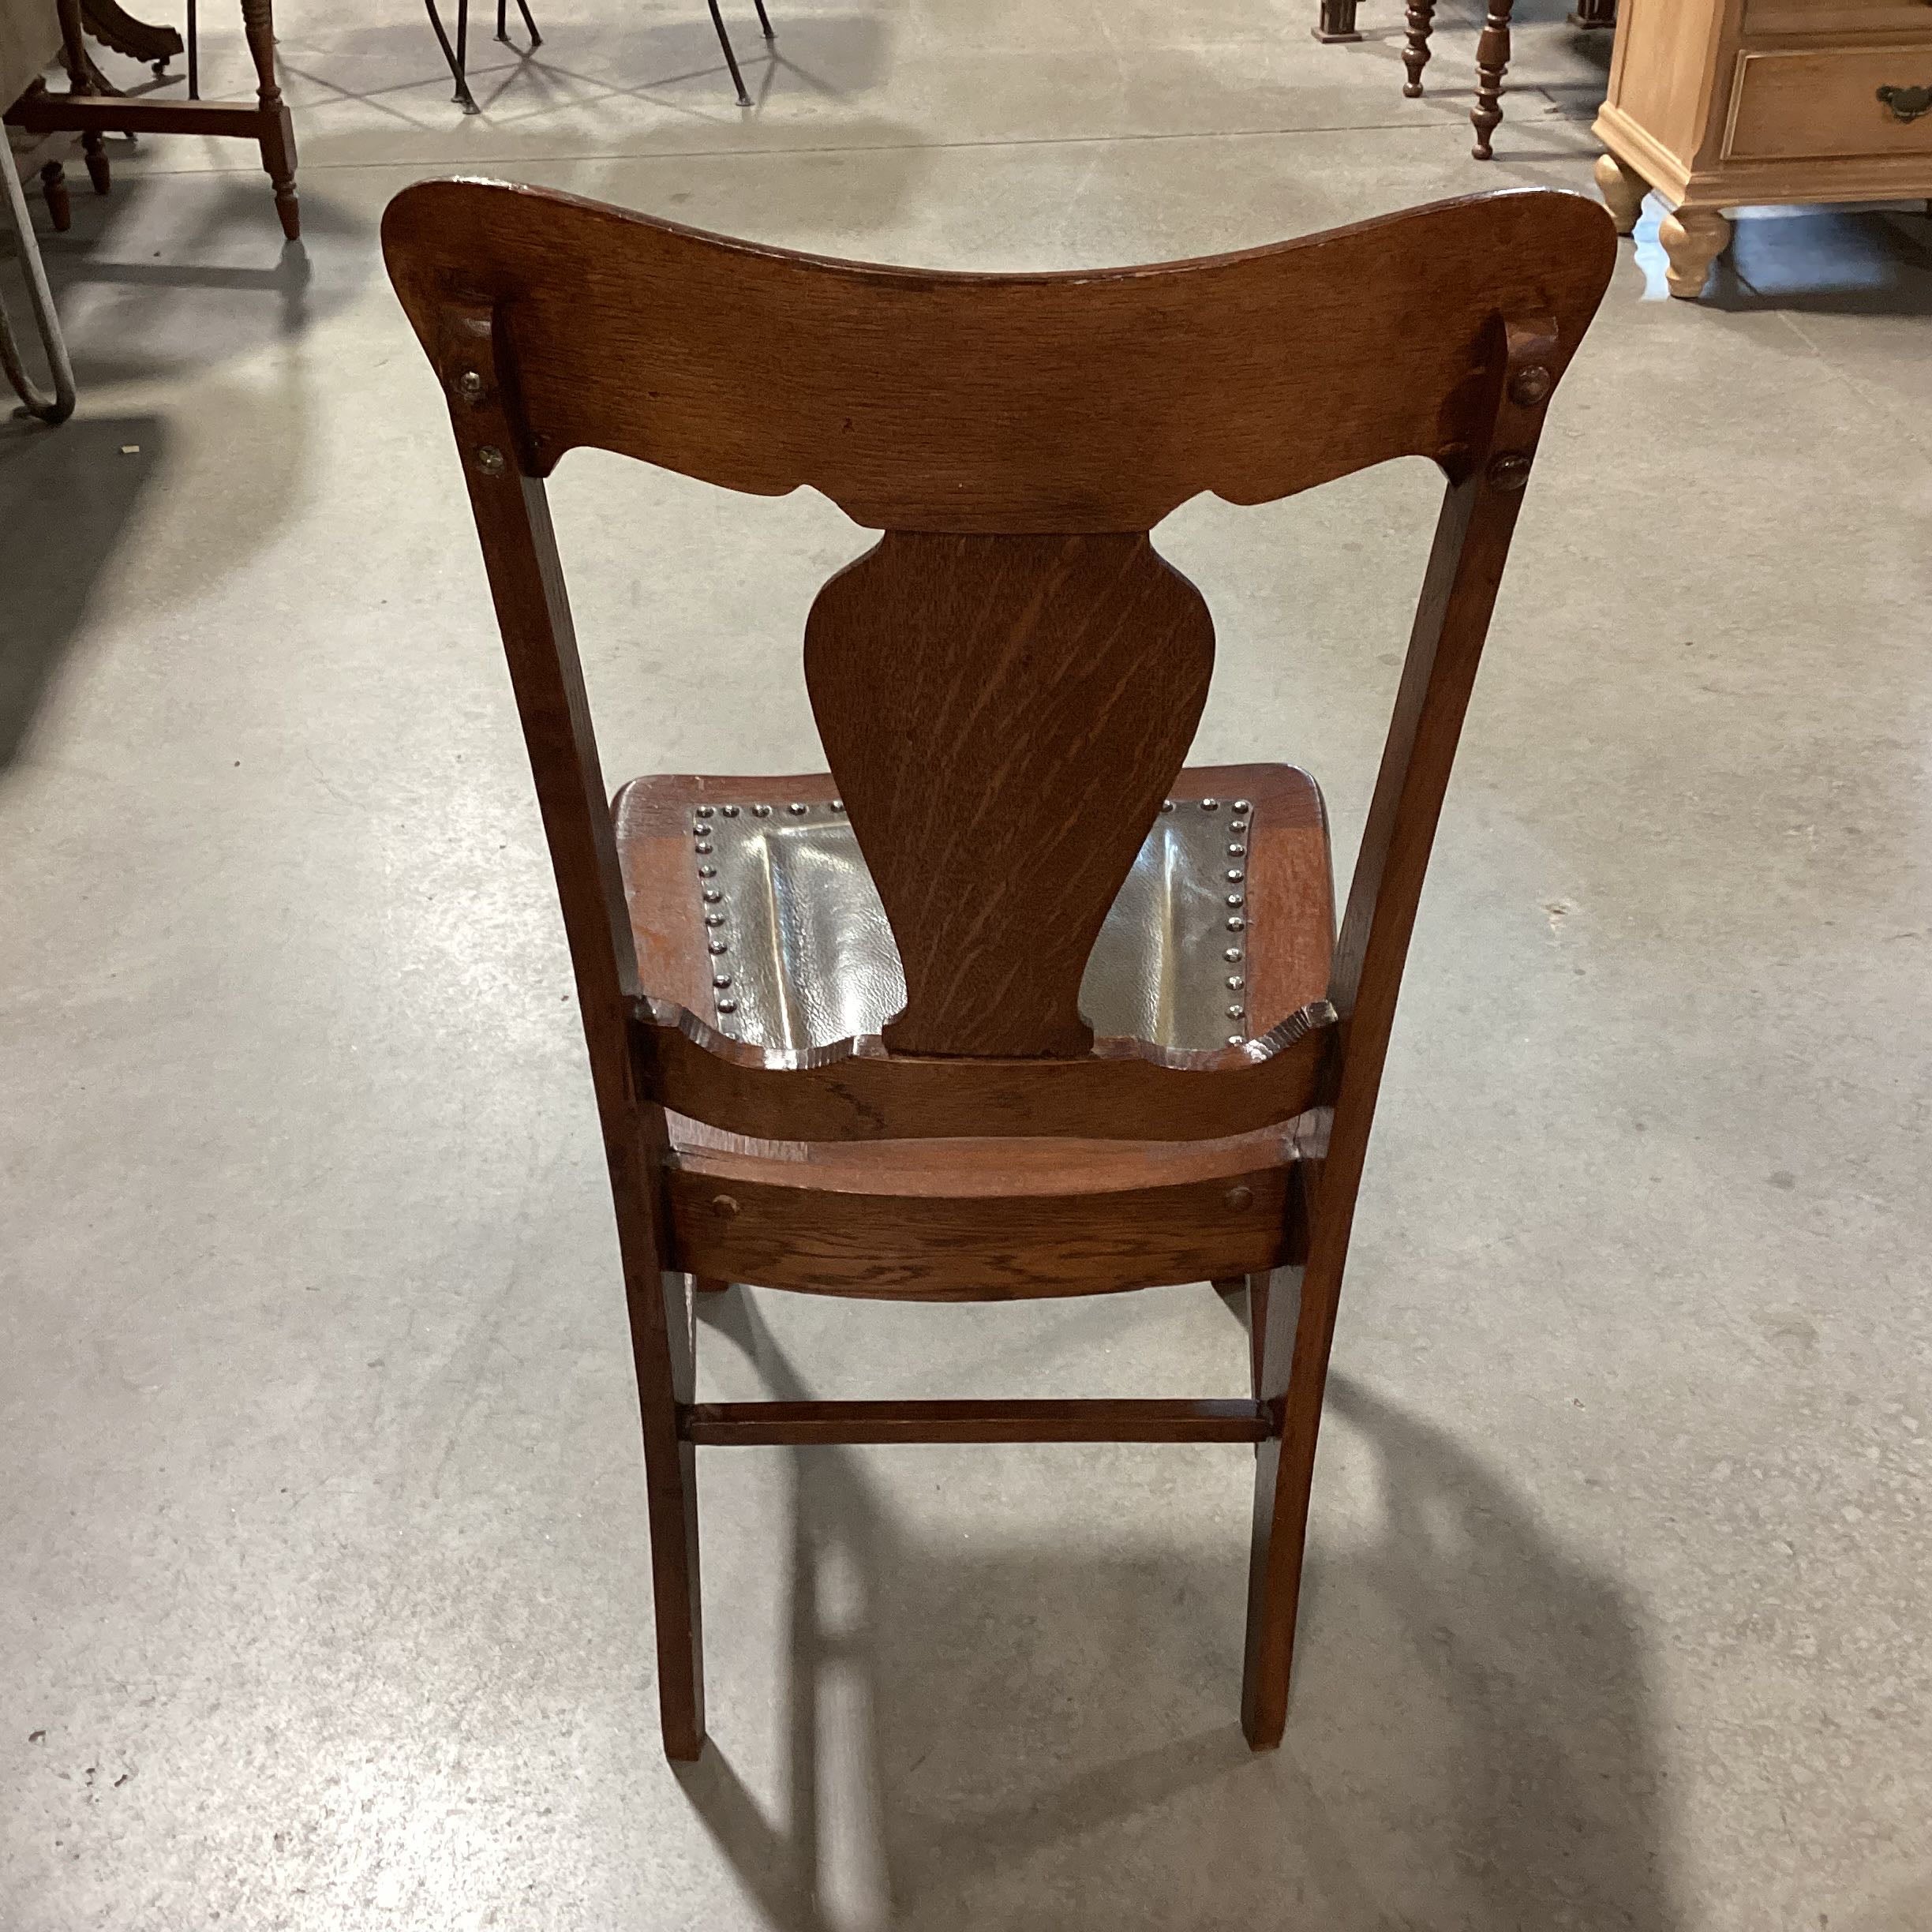 Vintage Wood with Nailhead Accents Leather Seat Dining Chair